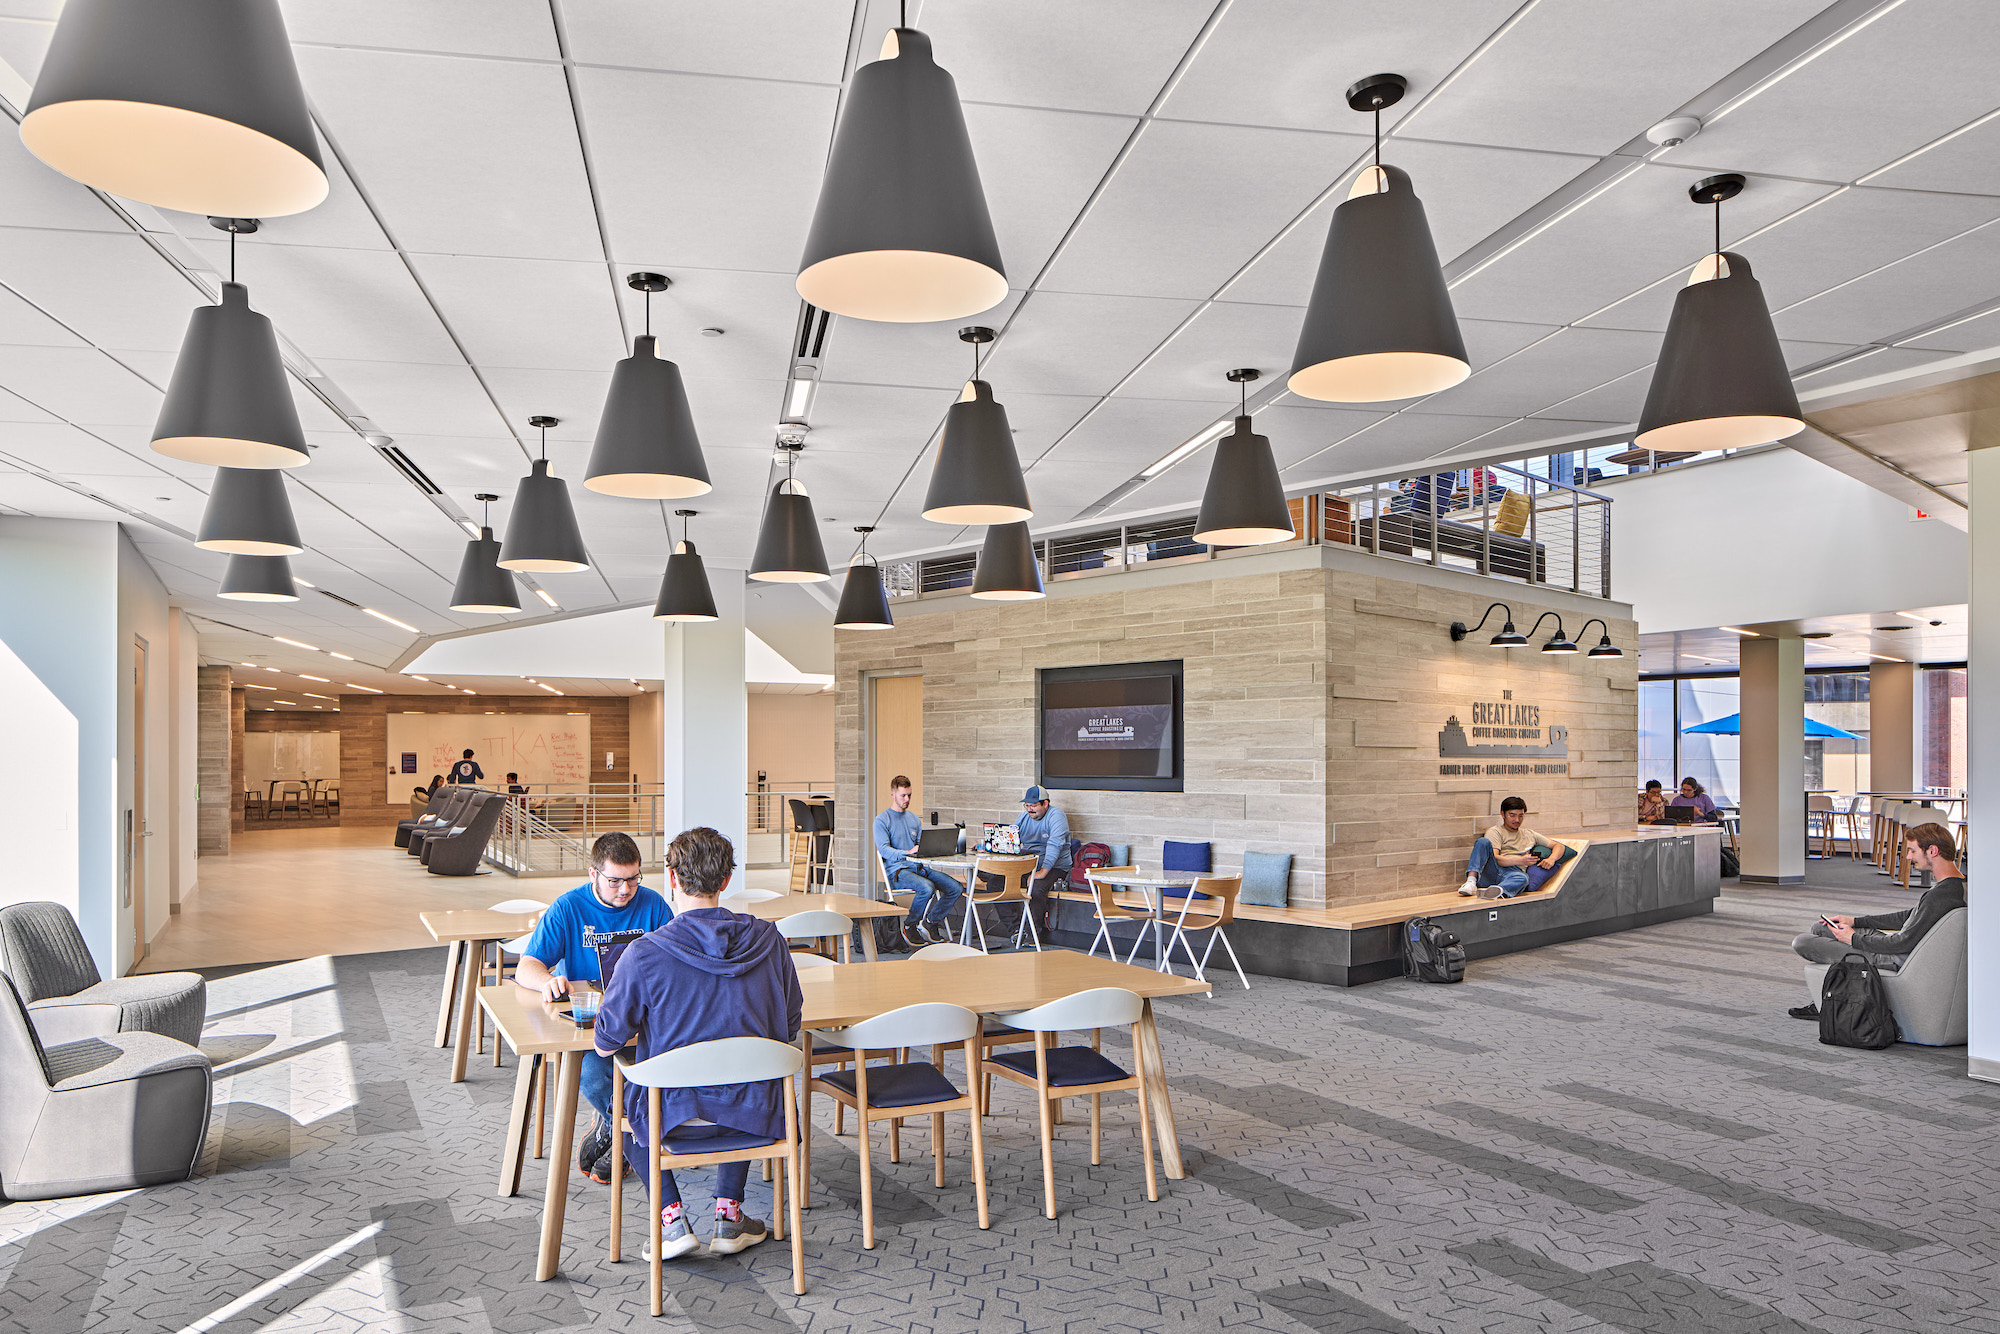 Kettering University Learning Commons designed by Stantec, Jason Keen Photography 6.jpeg